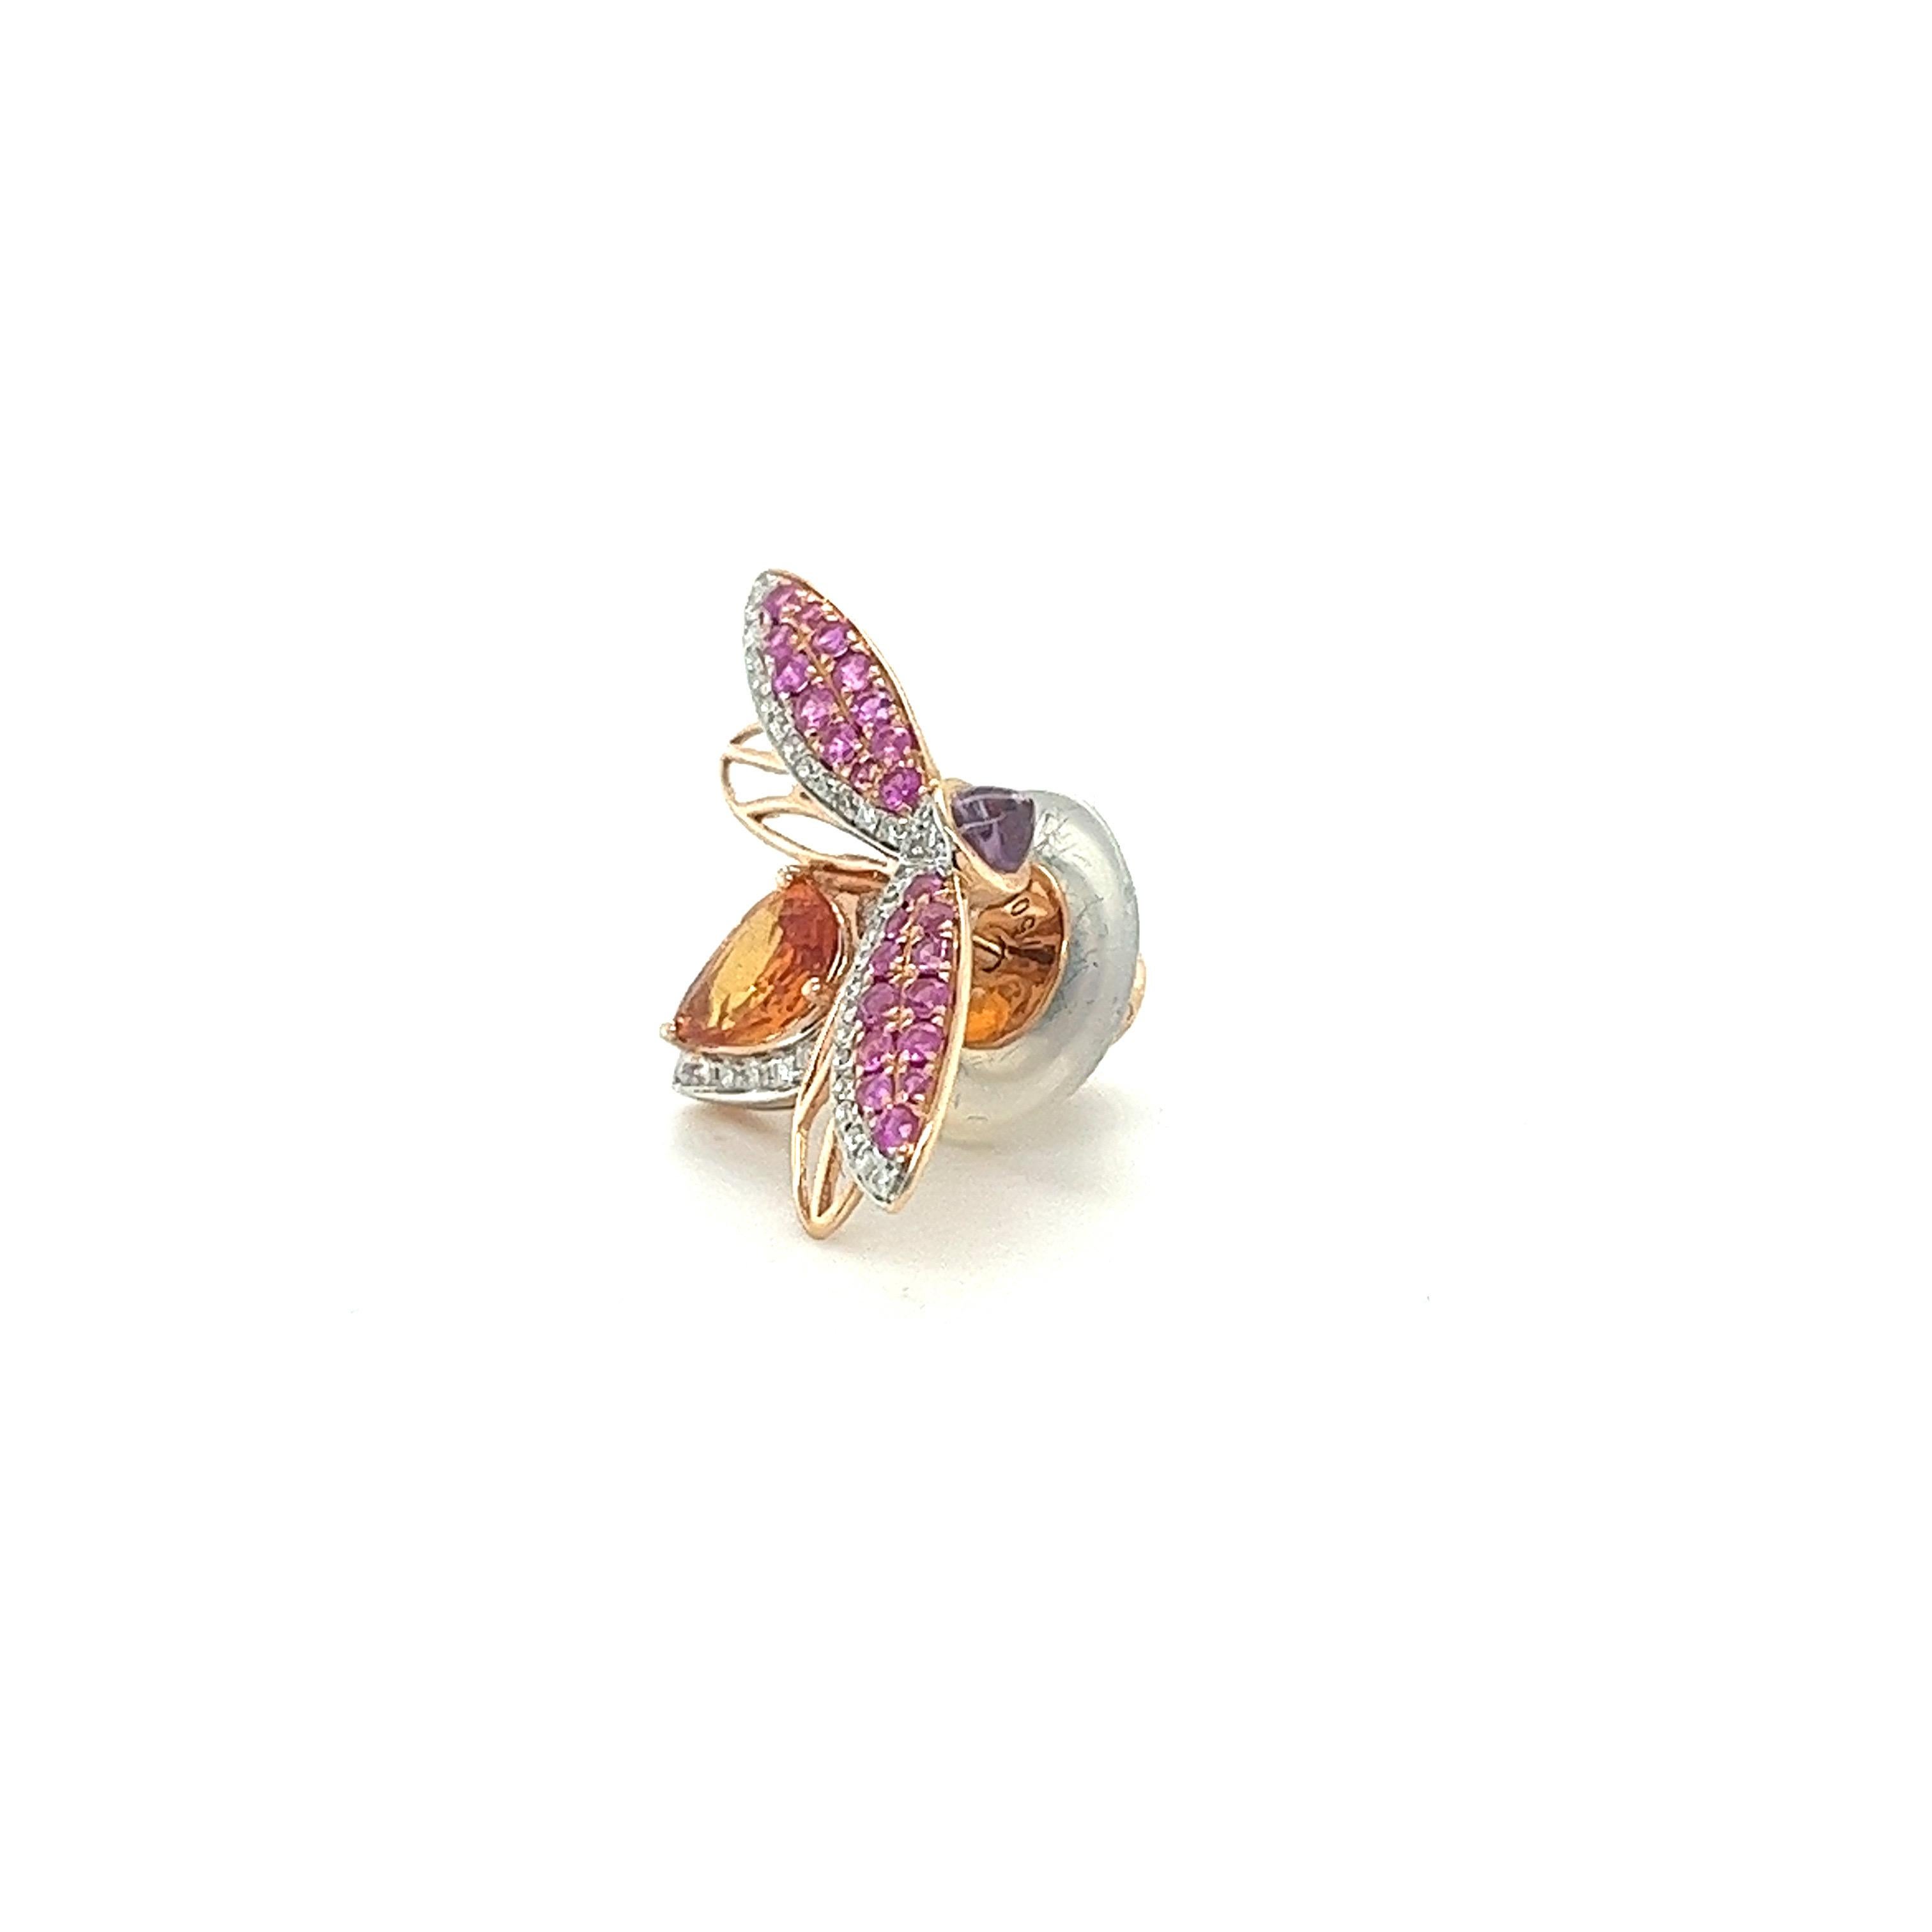 18K Rose Gold  Diamonds Bee Brooch

42 Diamonds 0.16 CT
24 Fancy Diamonds 0.25CT
1 Pink Sapphire 0.55 CT
1 Purple Sapphire 0.21 CT
18K Rose Gold 2.56  GM

Sapphire’s are celestial stones. They entice with their sparkling color, their mysterious